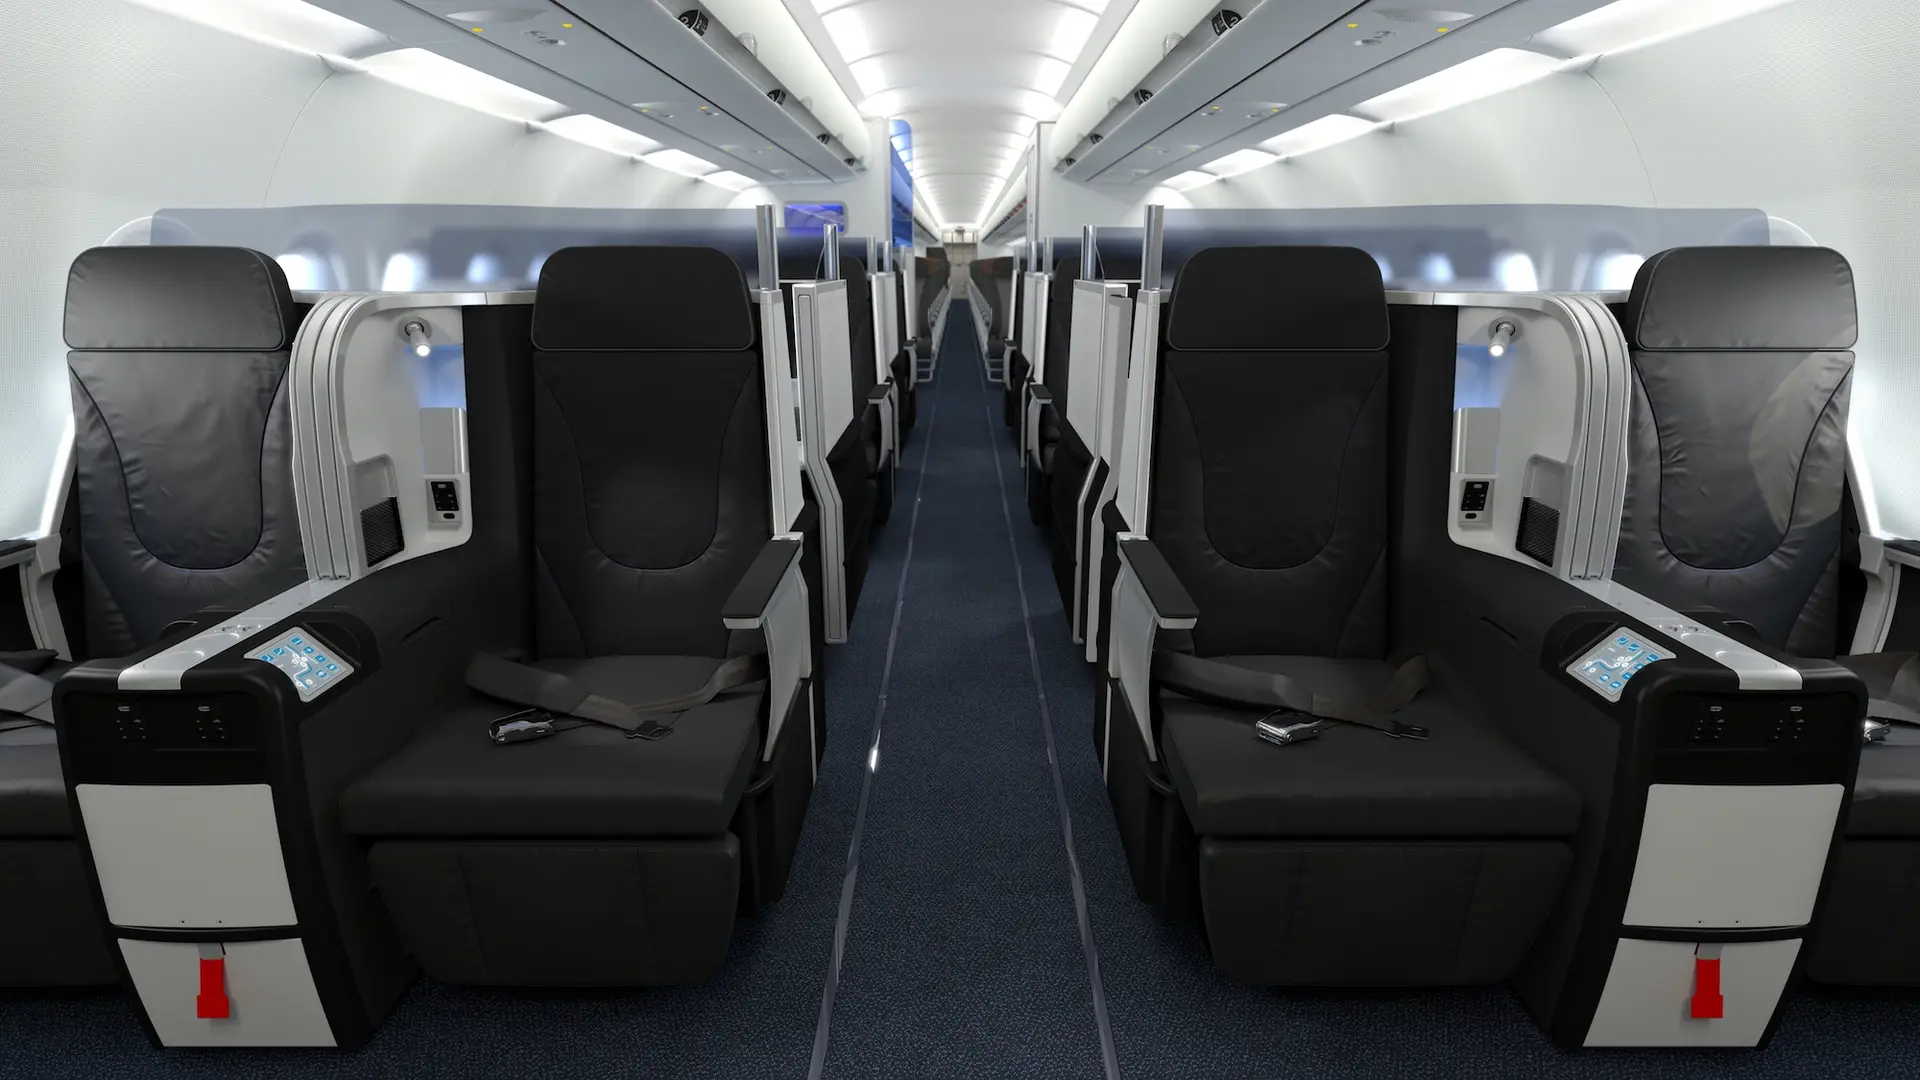 Airlines Articles - Domestic Premium Cabins in the USA - The BusinessClass.com Guide